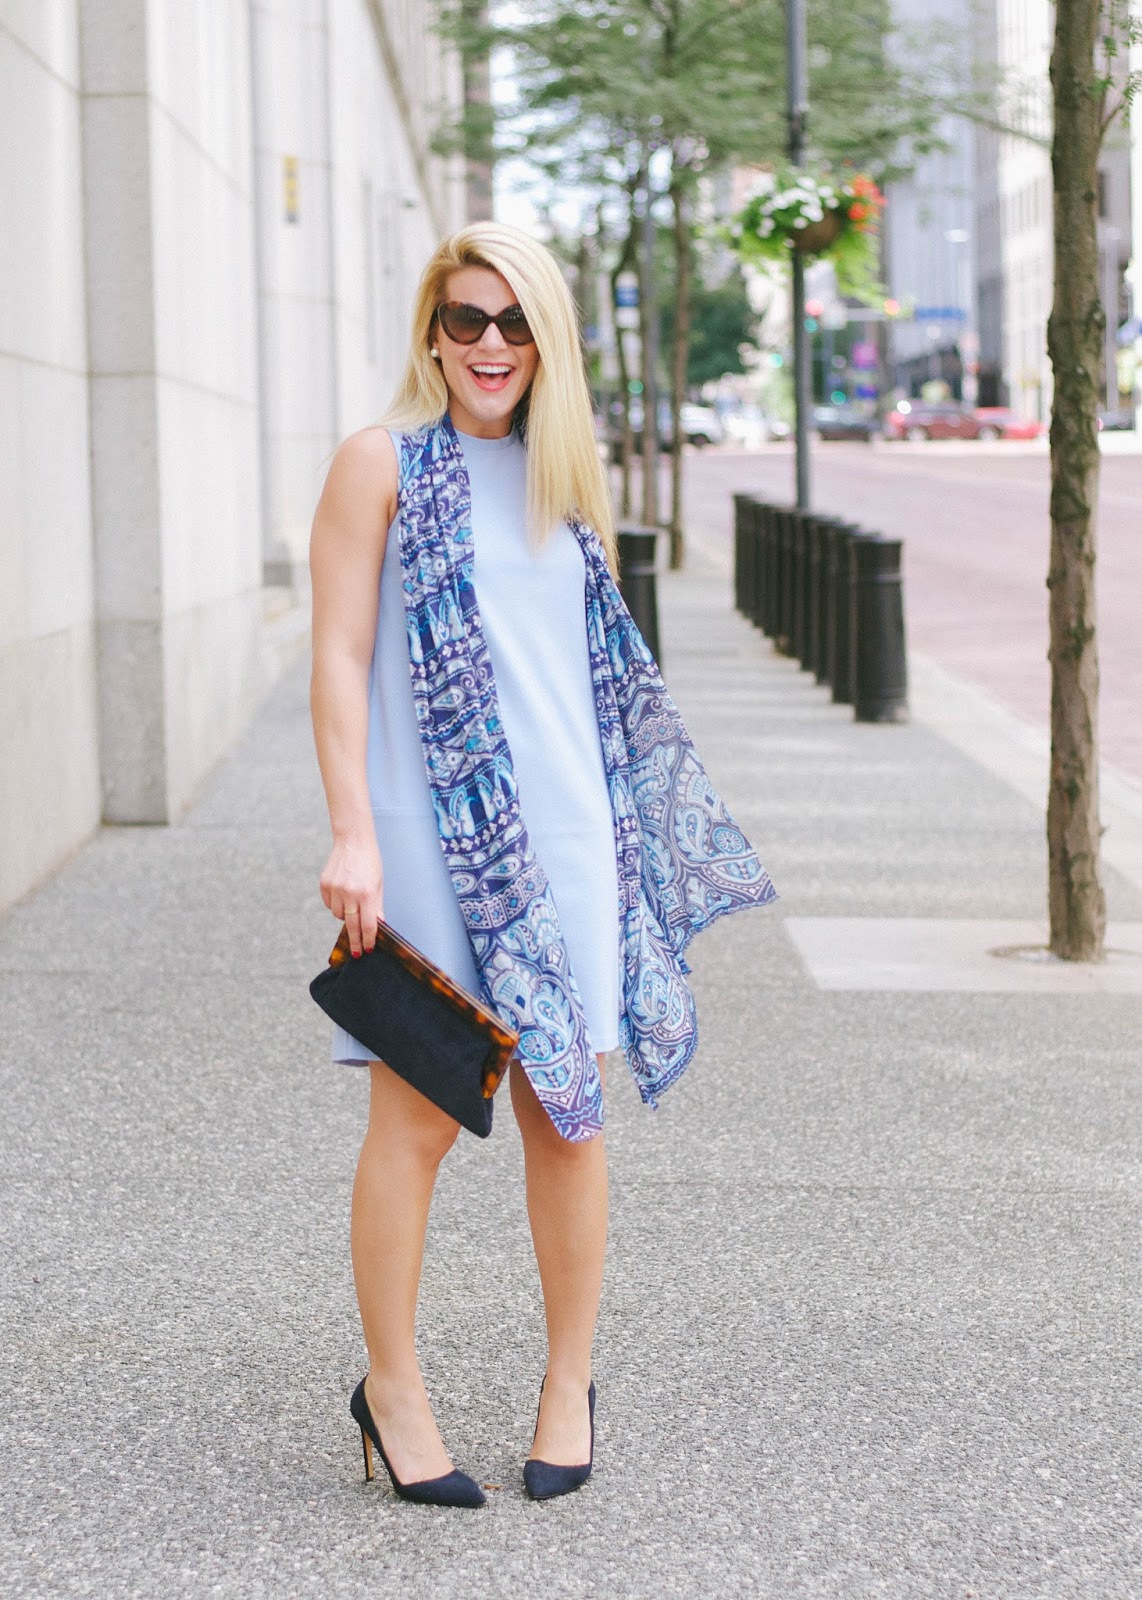 Summer Wind: Wear-to-work with J.McLaughlin